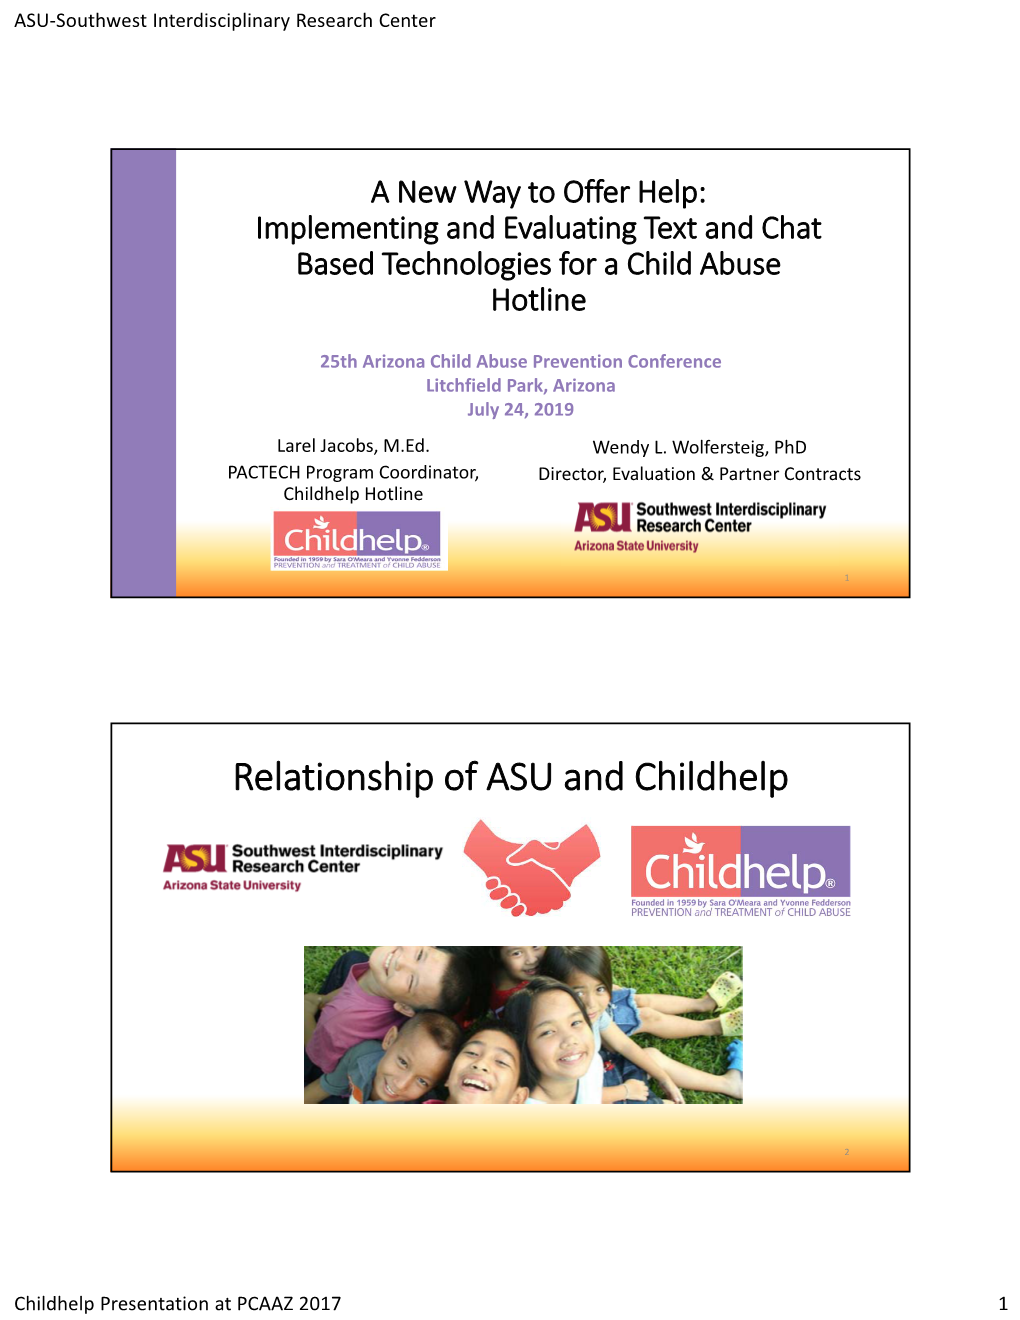 Relationship of ASU and Childhelp